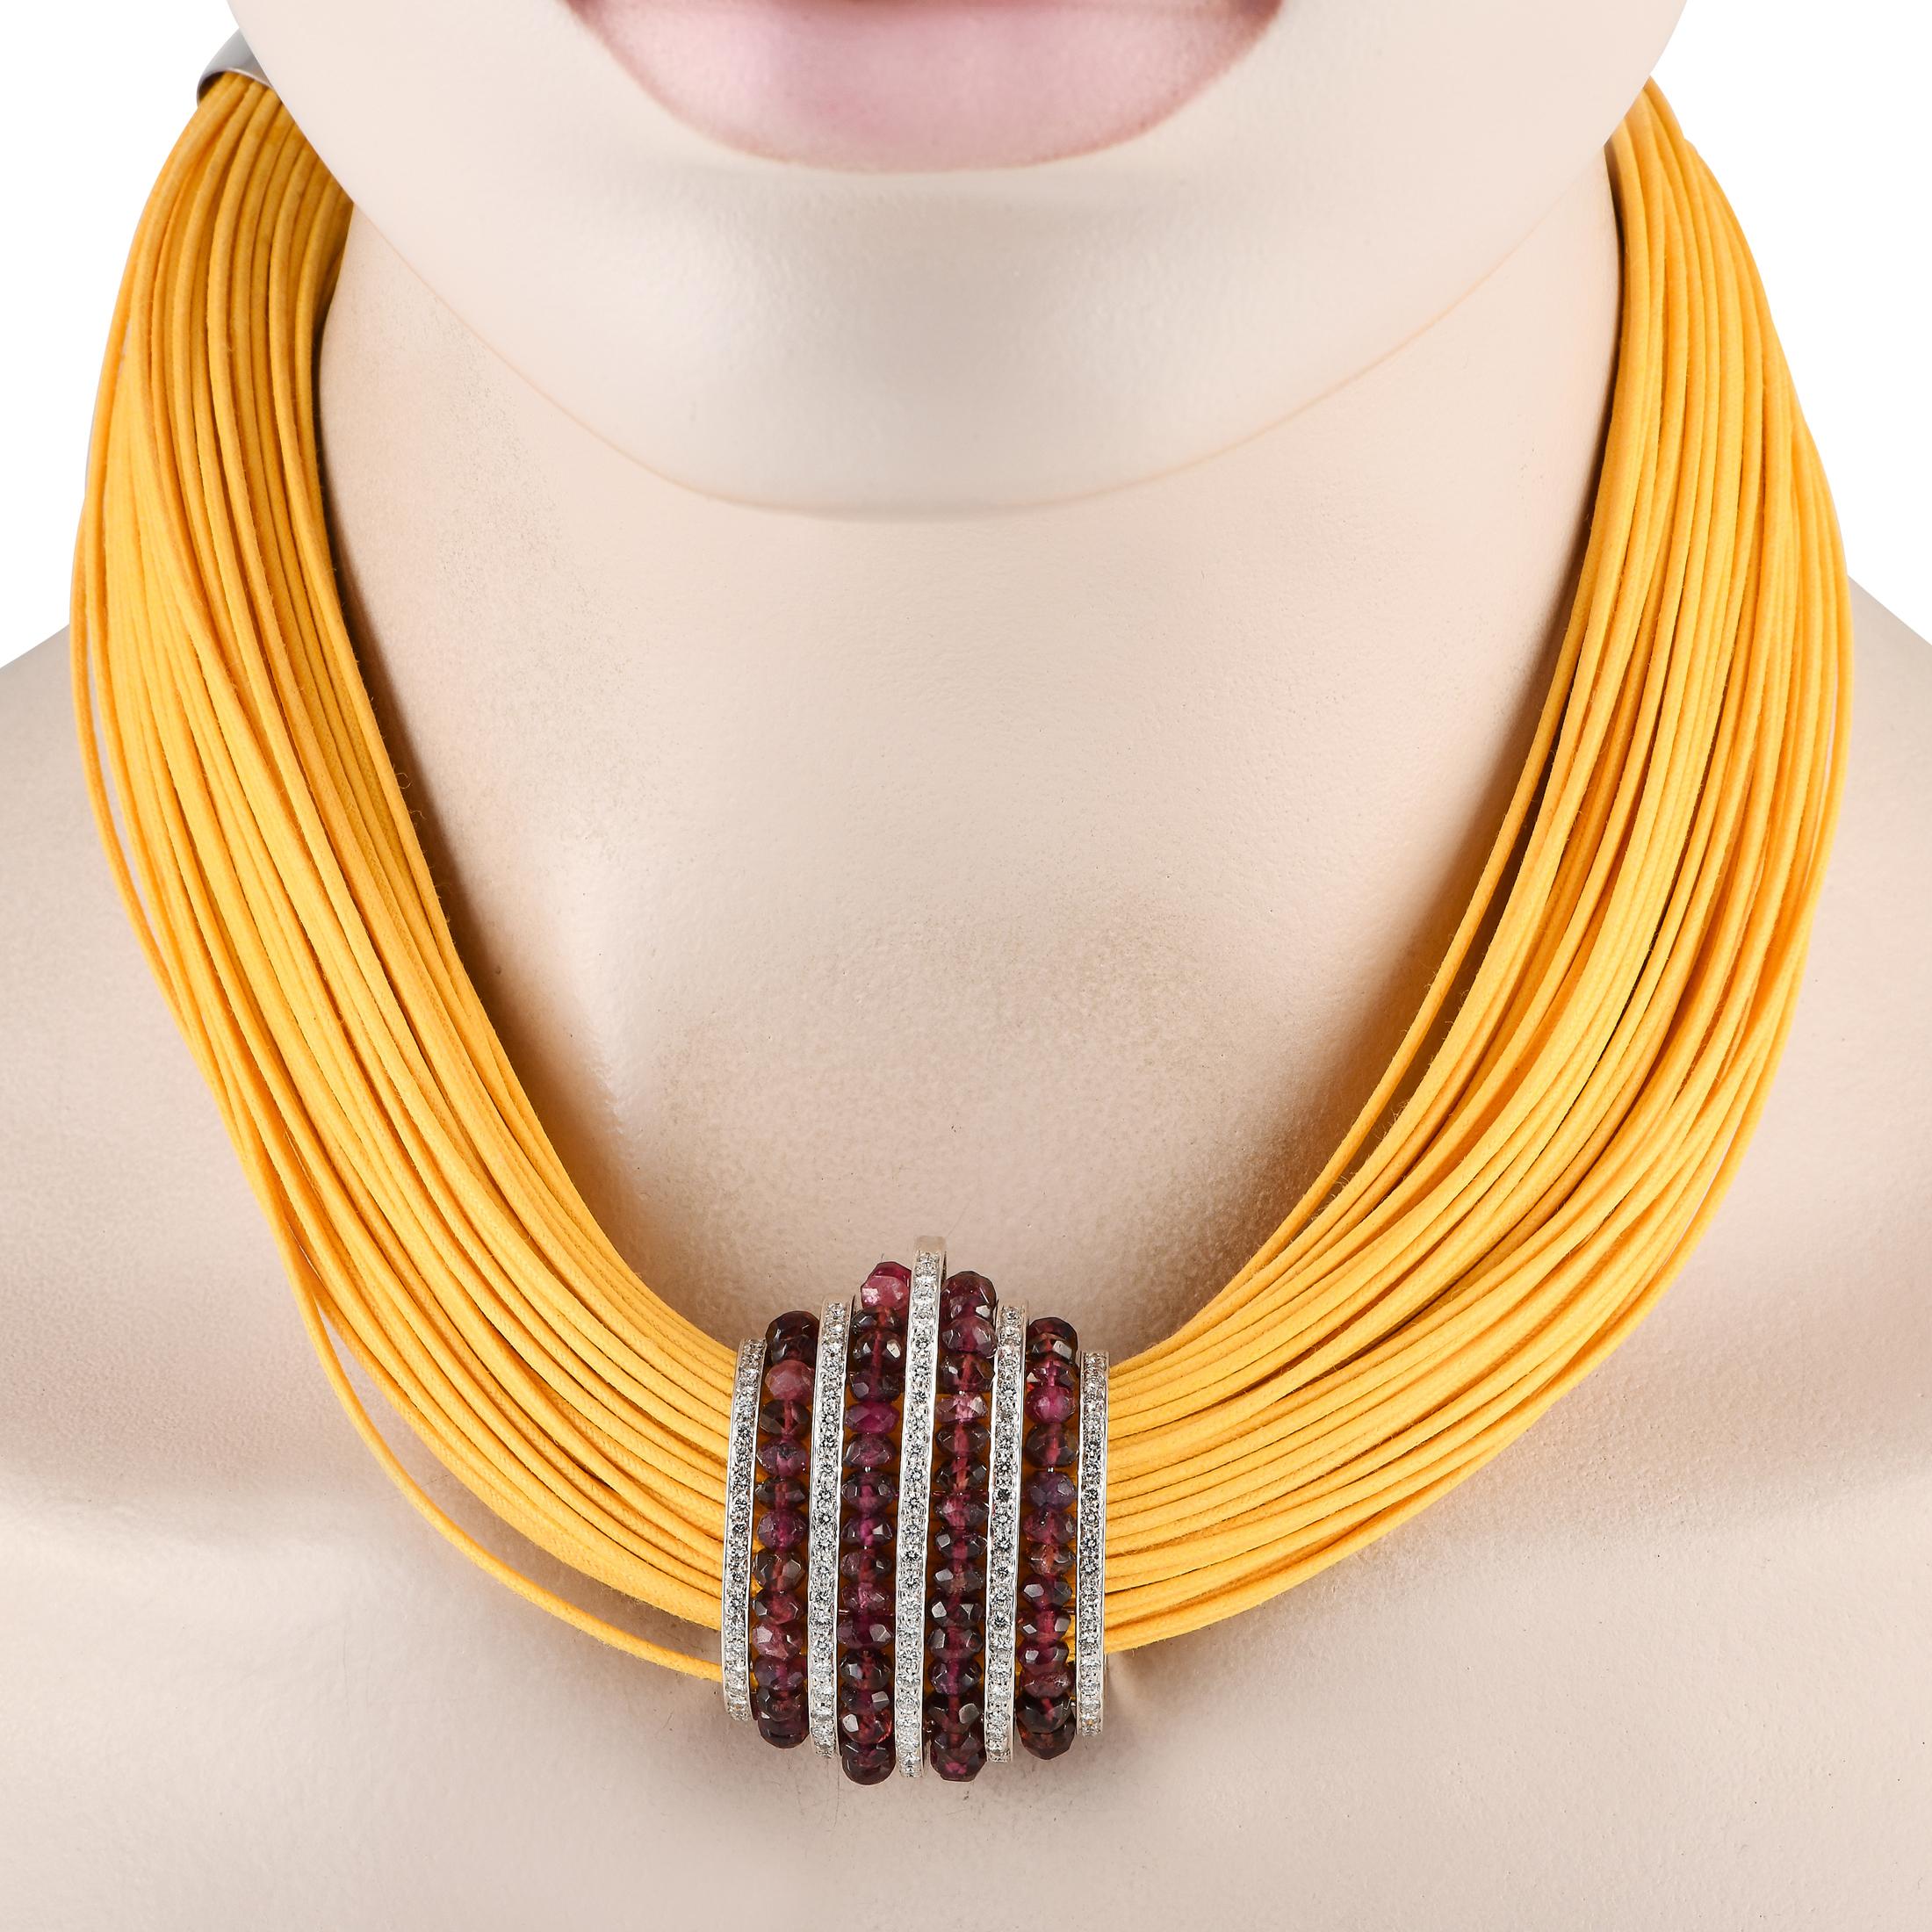 This bold Piodoro necklace will continually make a stylish statement. At the center of the multi-strand silk cord, youll find an 18K White Gold pendant measuring 7.5 long. Its adorned with a sparkling array of Tourmaline gemstones and Diamonds